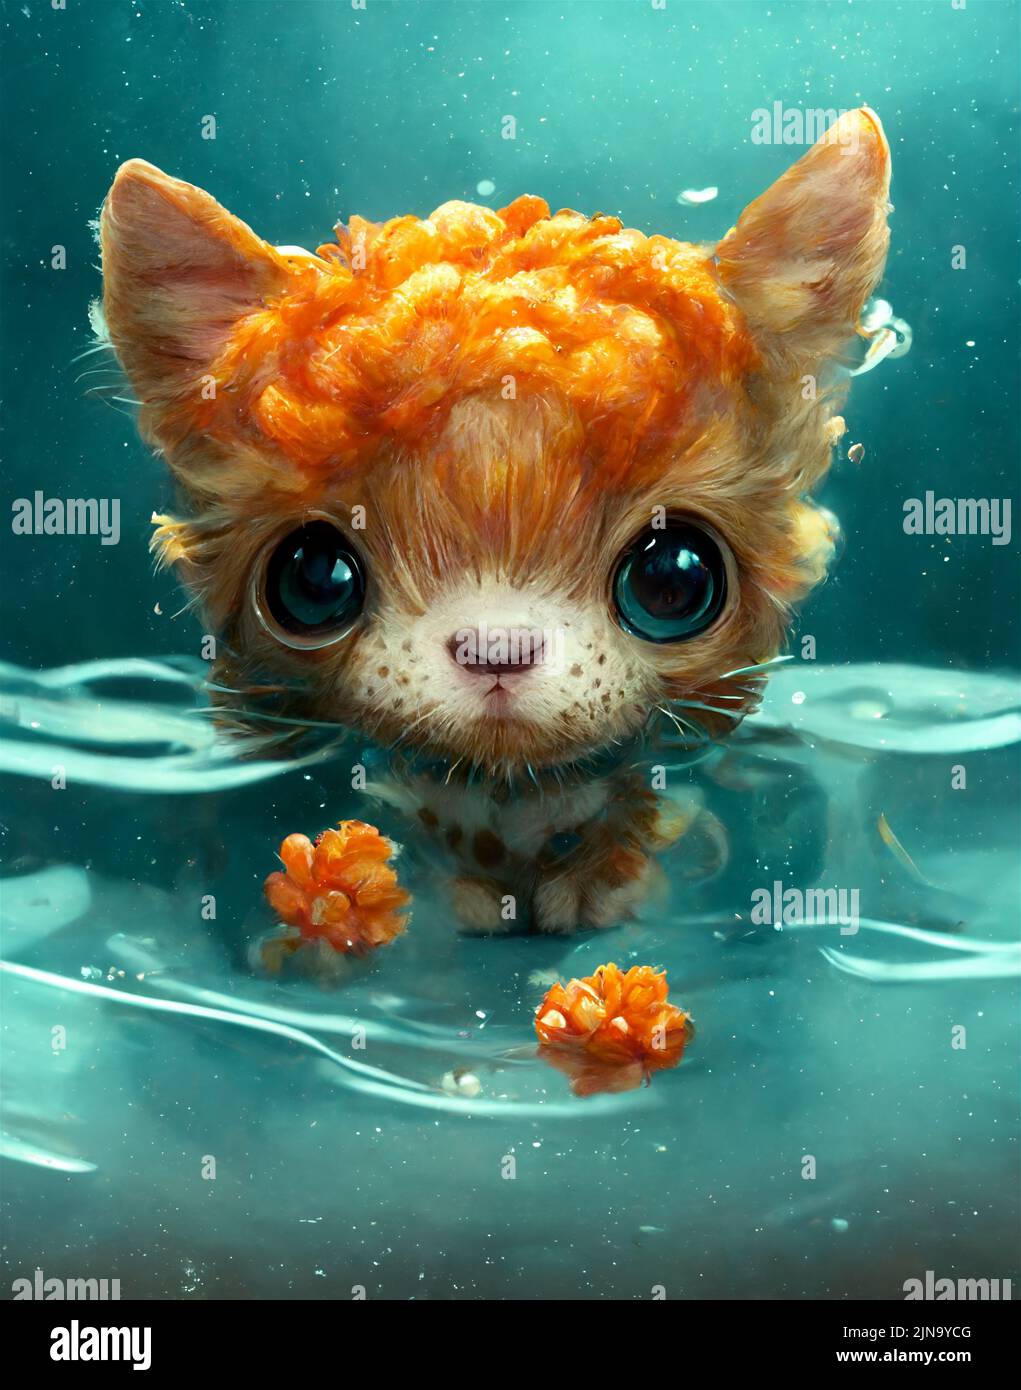 Cute ginger cat in water, abstract background picture Stock Photo